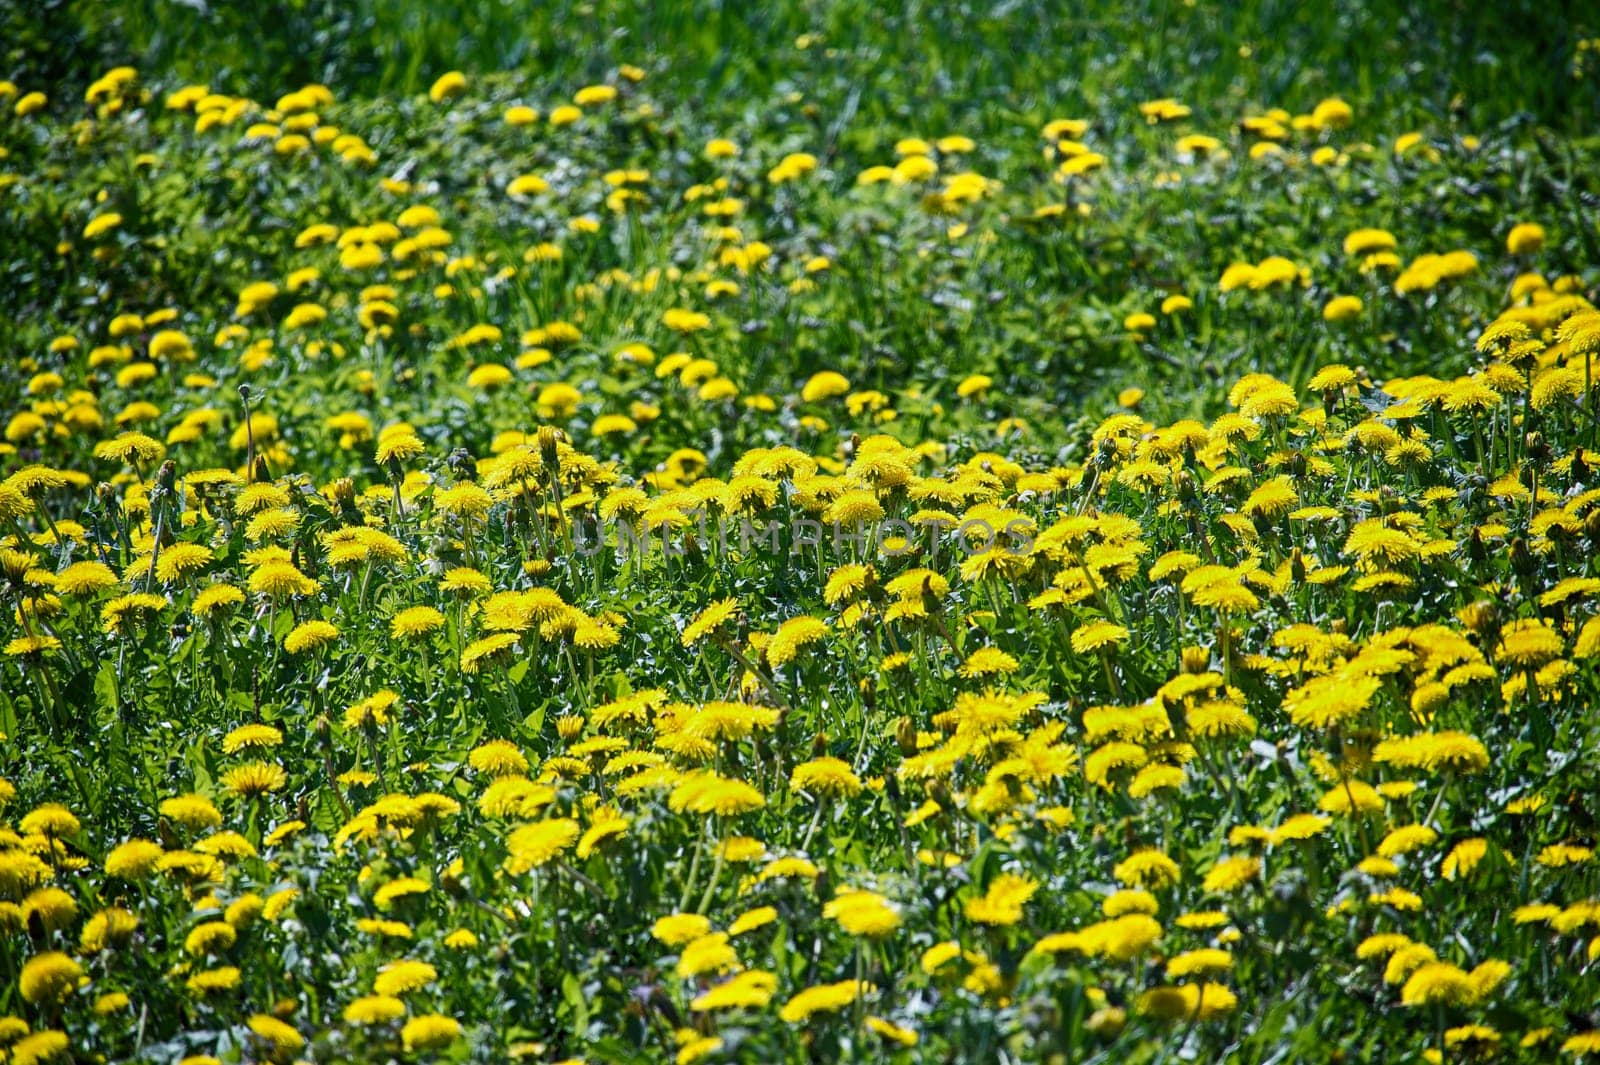 Meadow teeming with yellow dandelions amidst green grass by NetPix